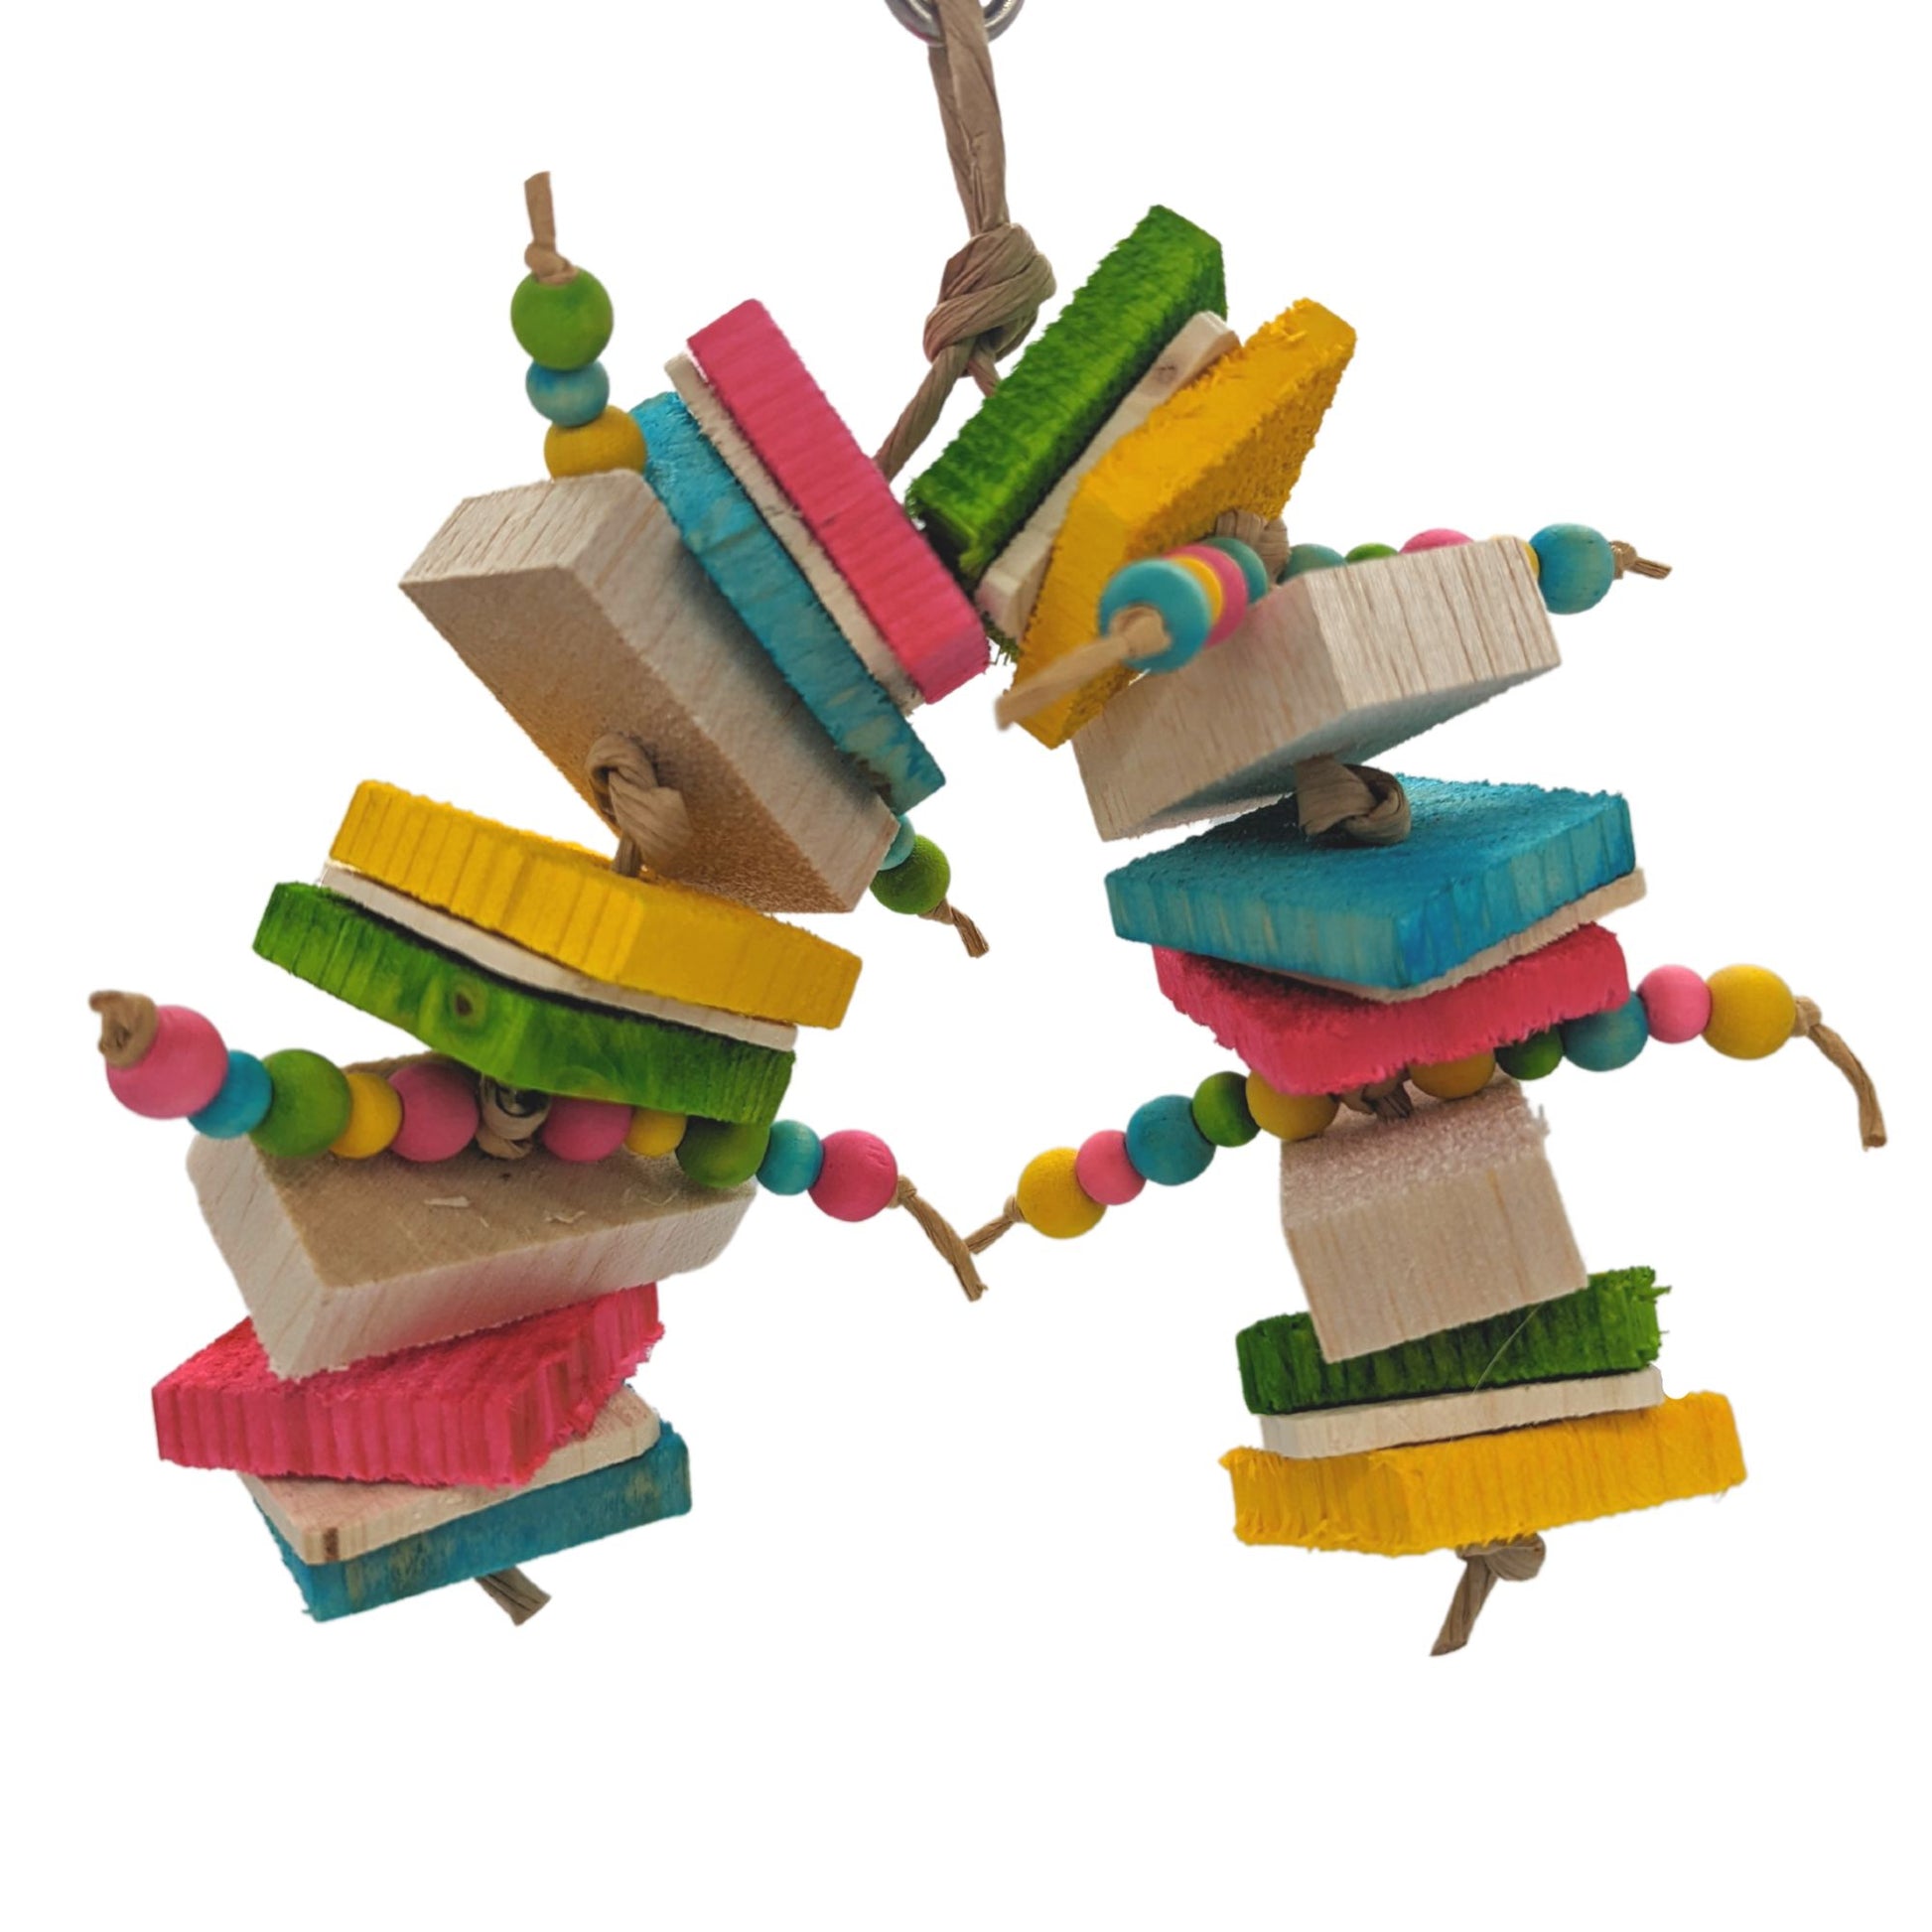 A bird toy with alternating slats of balsa and thin pine, accented with small wooden beads